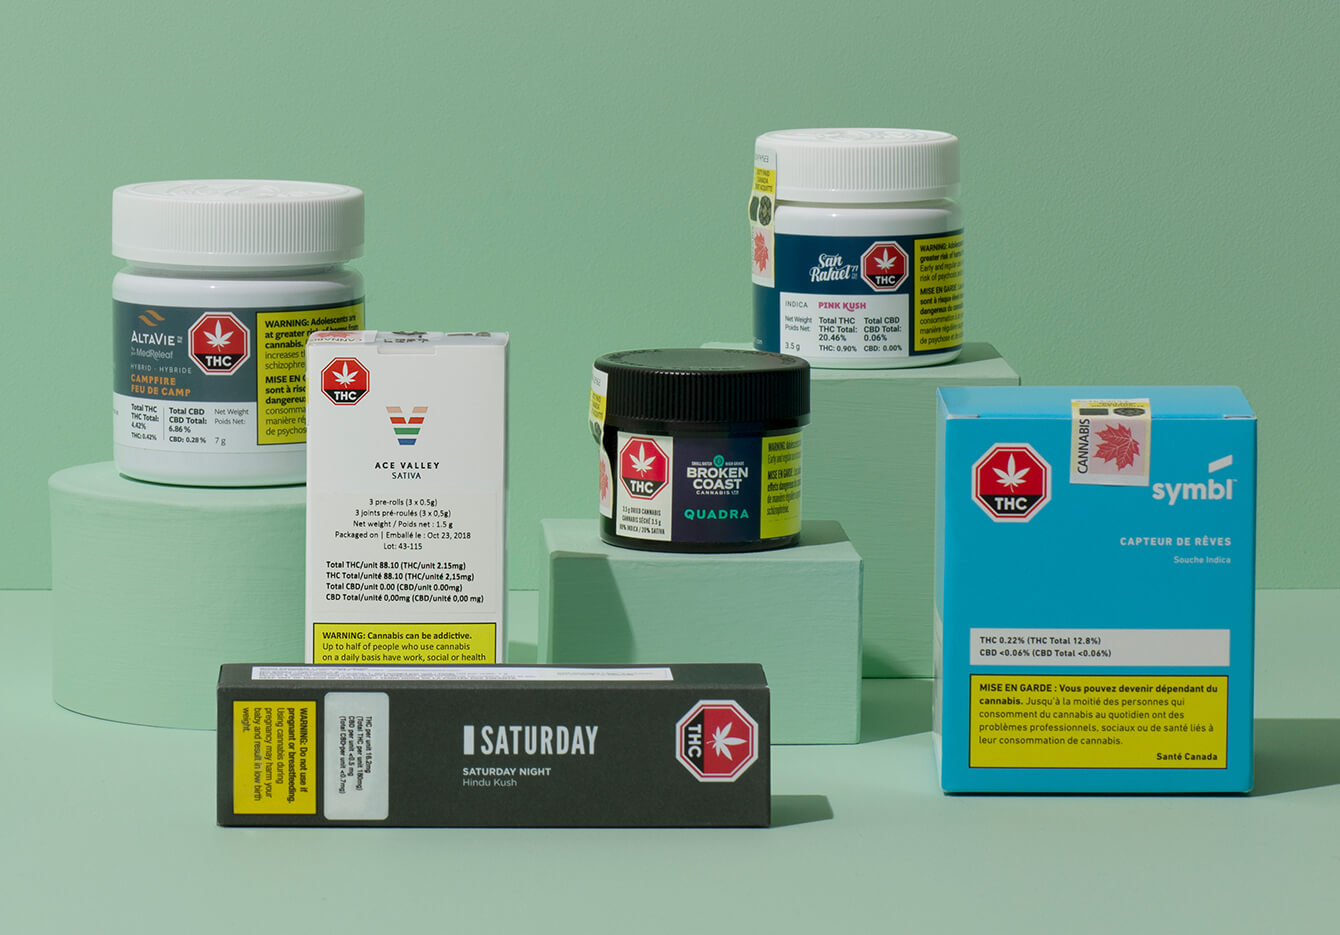 How to Read a Cannabis Product Label